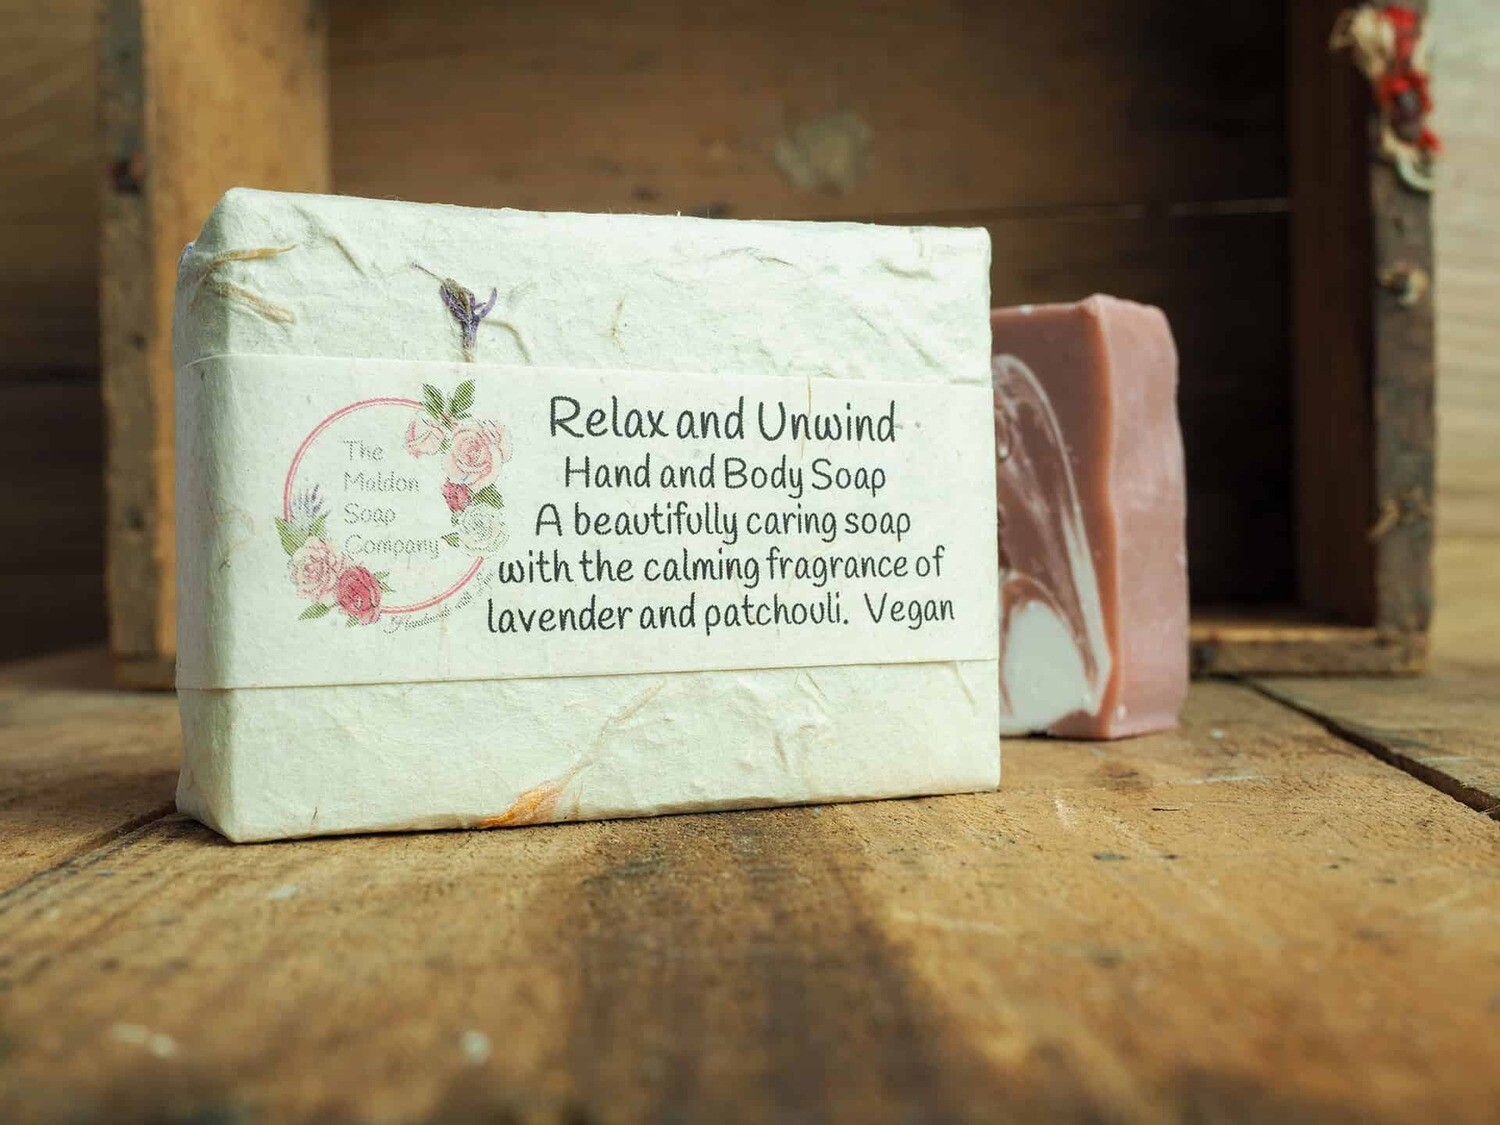 Relax and Unwind Soap By Maldon Soap